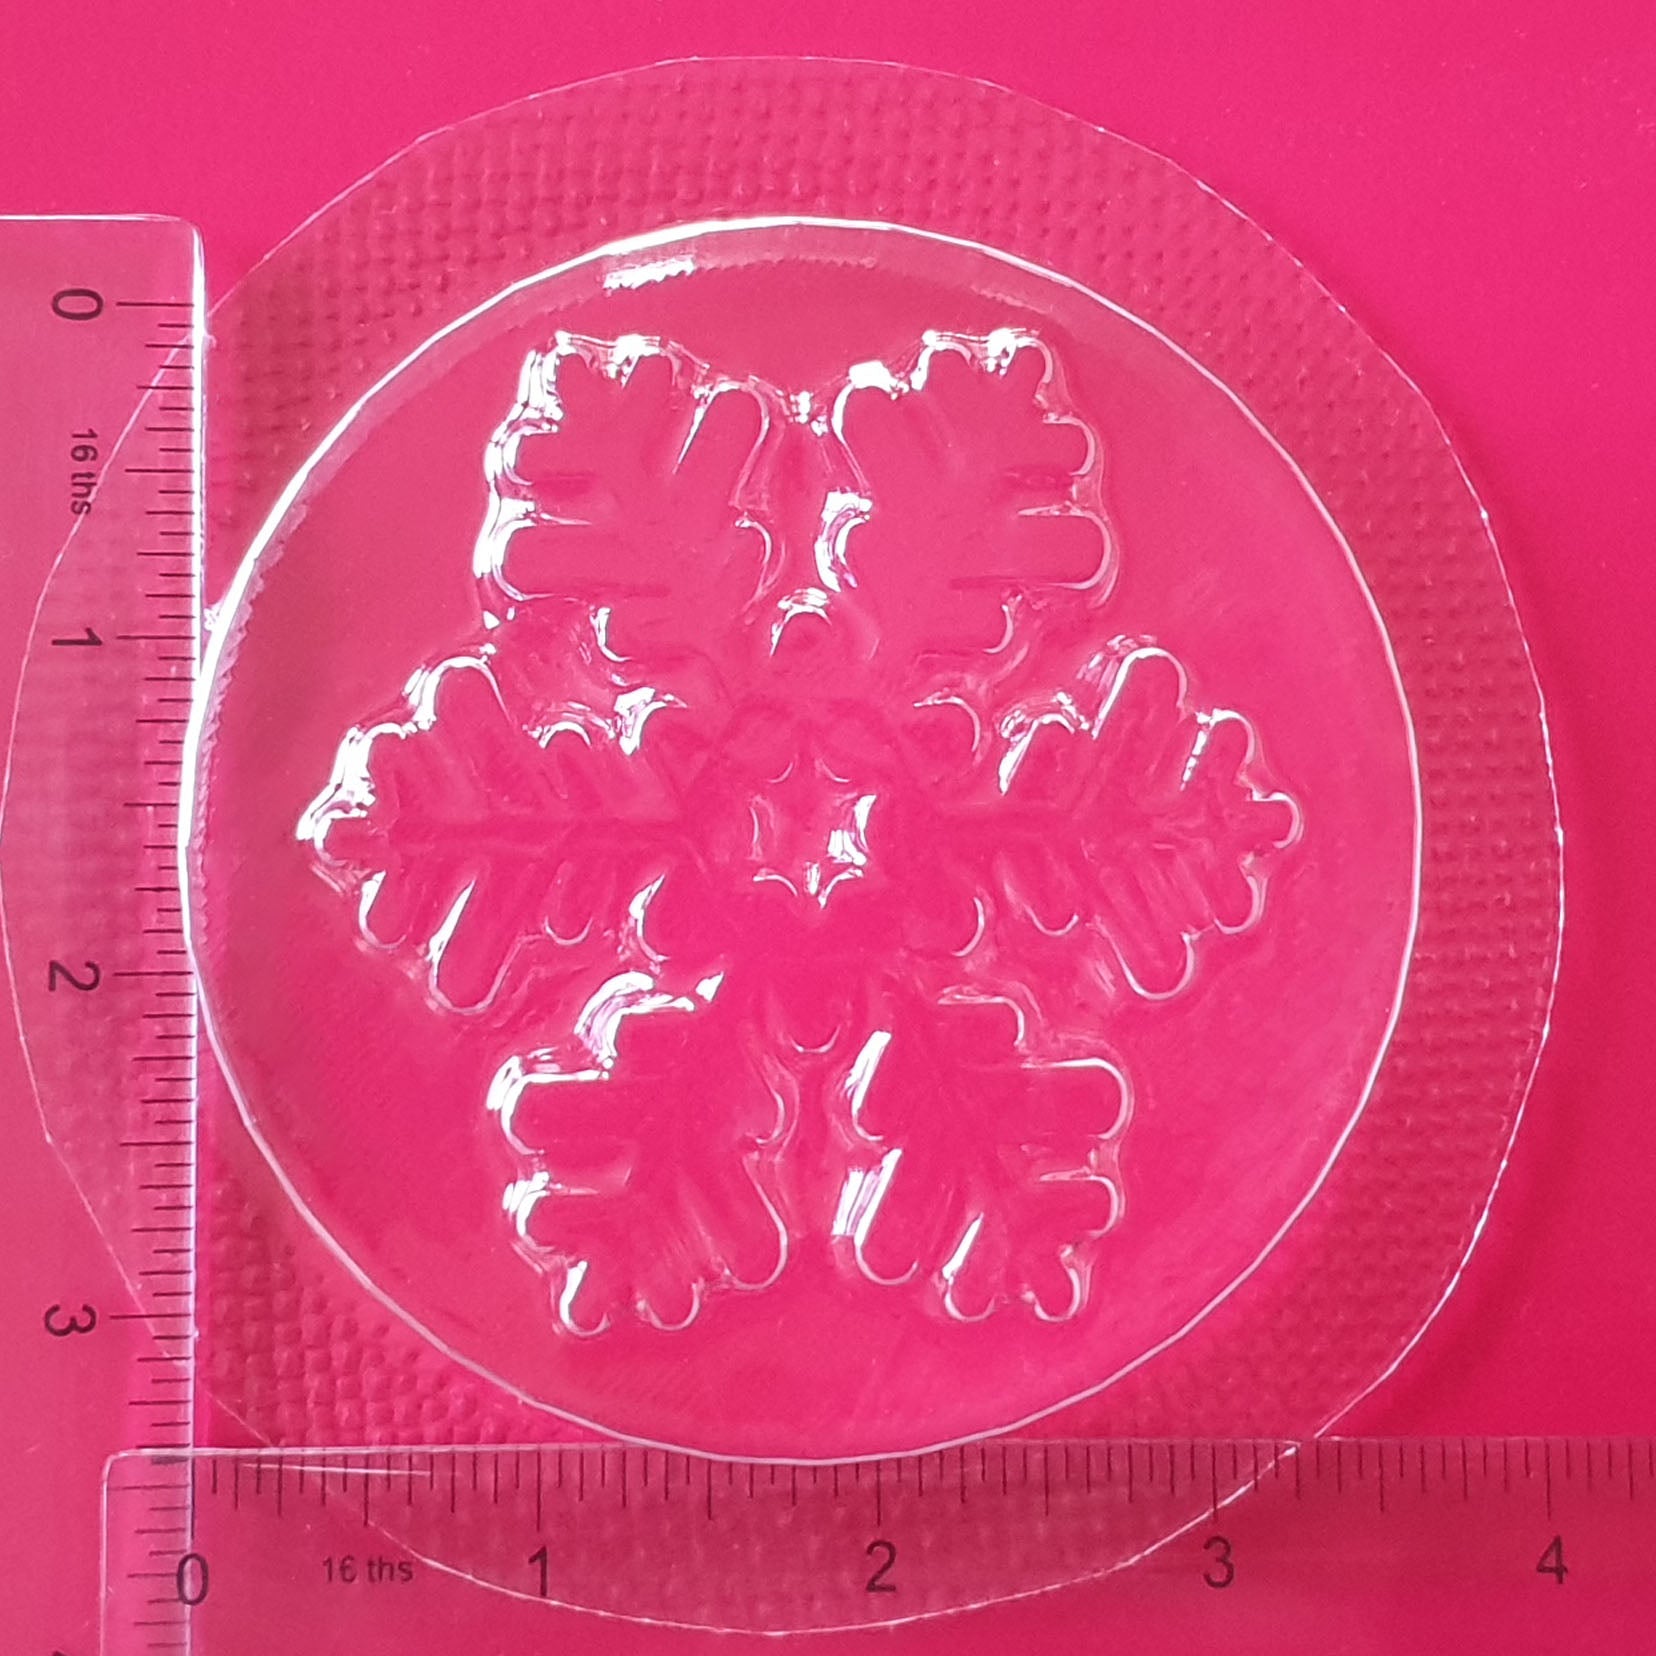 Snowflake Disc Mould | Truly Personal | Bath Bomb, Soap, Resin, Chocolate, Jelly, Wax Melts Mold